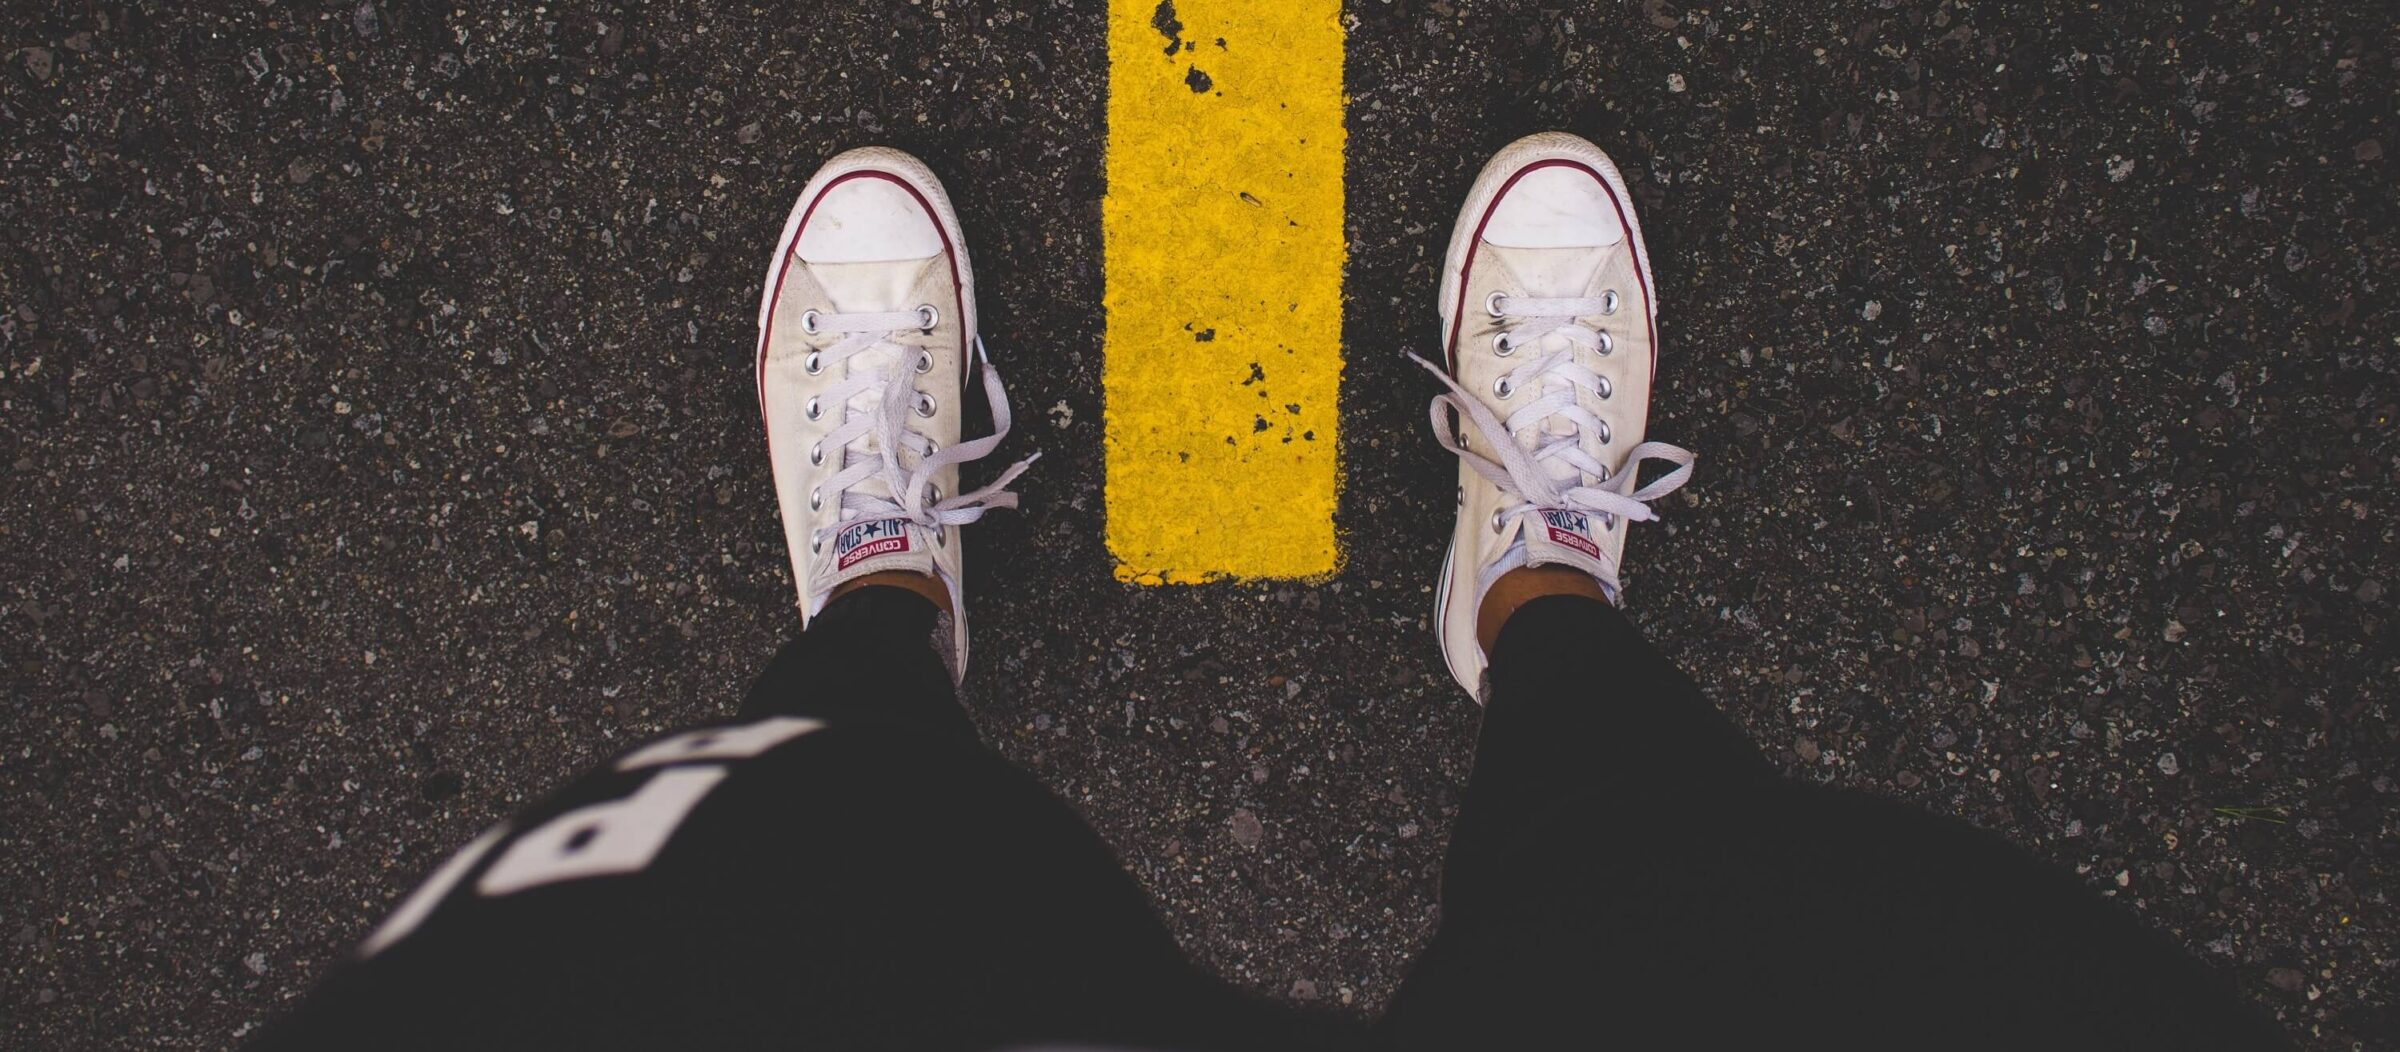 tops of white sneakers straddling yellow line on black pavement